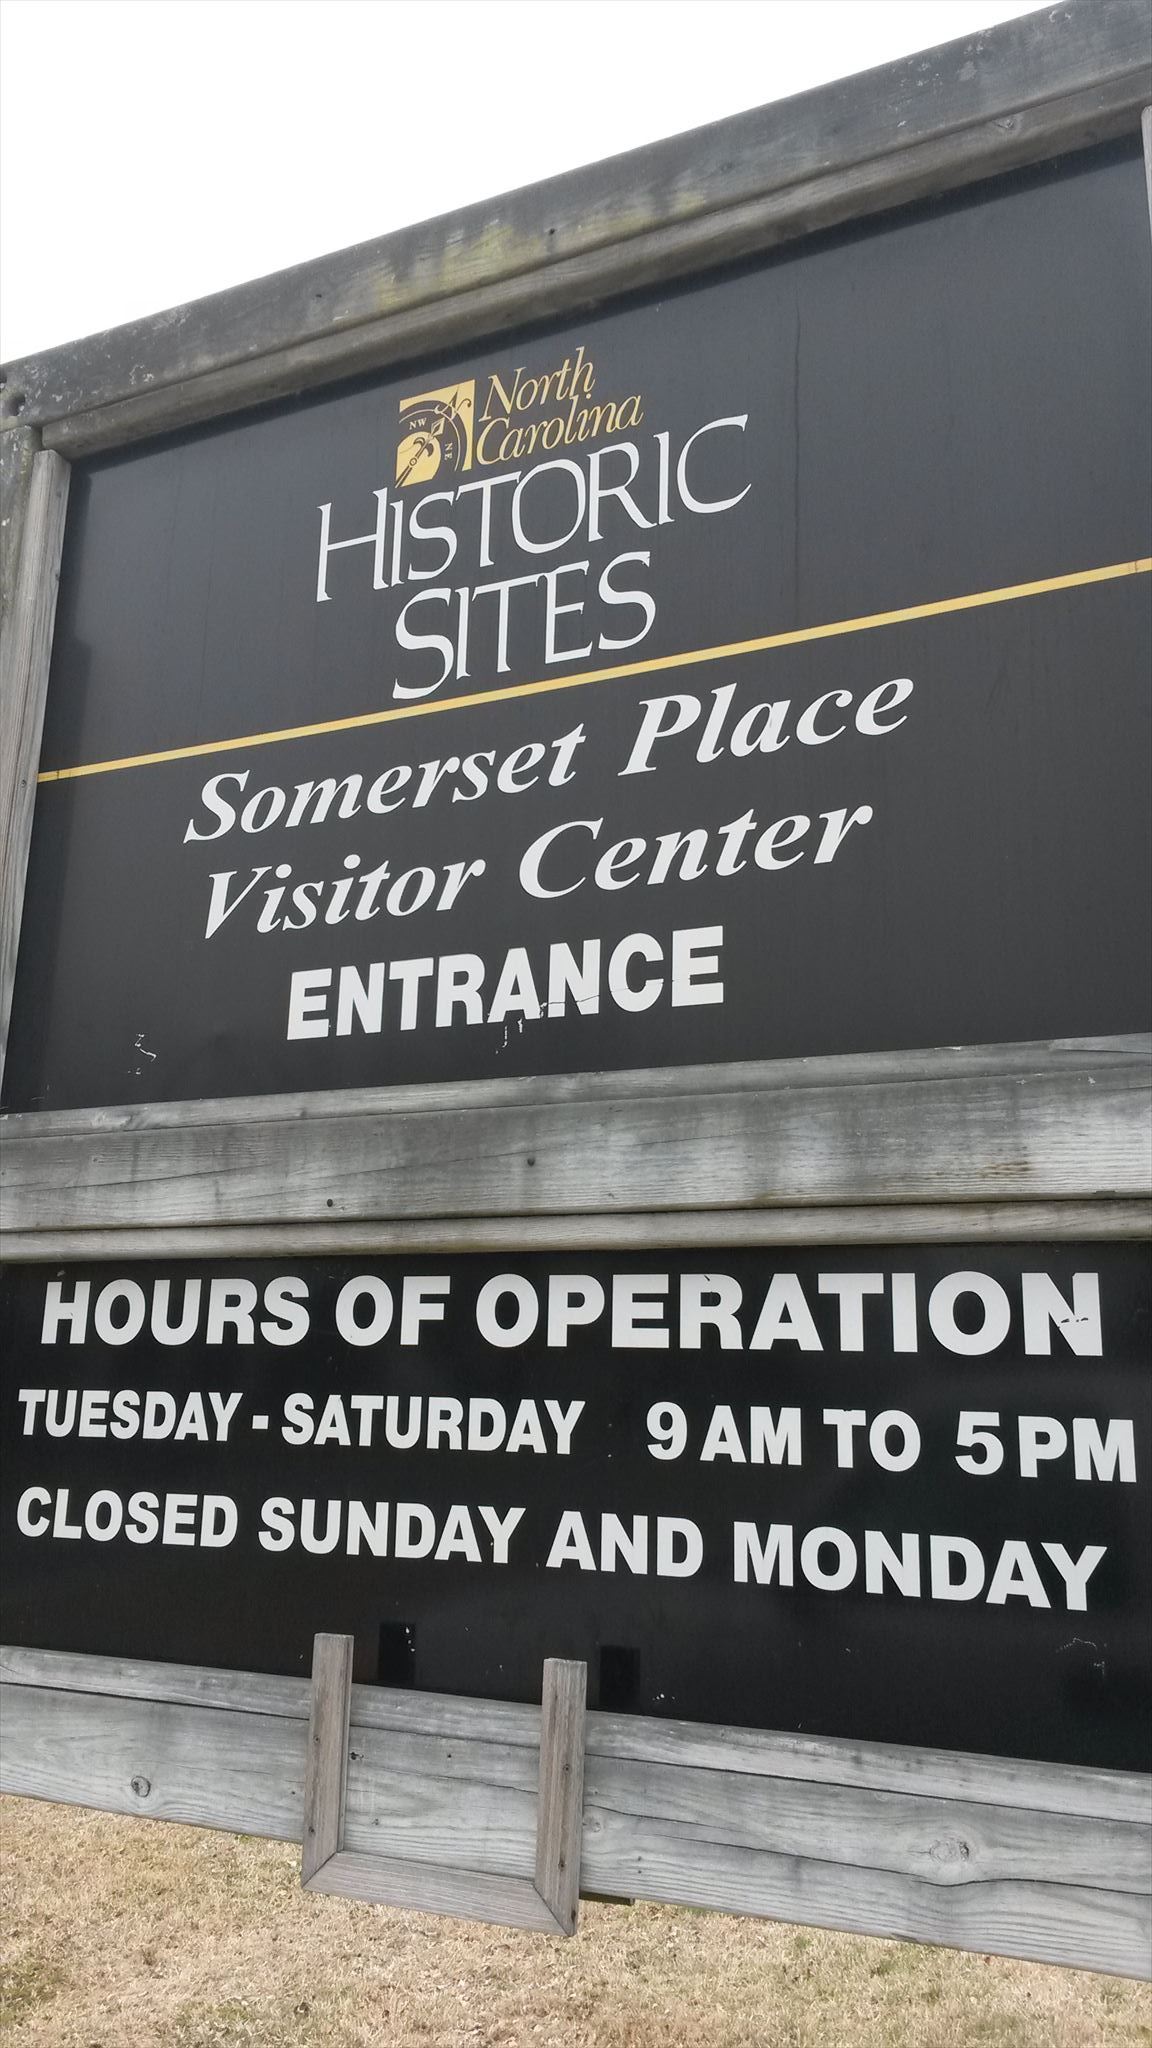 Sign to somerset Place